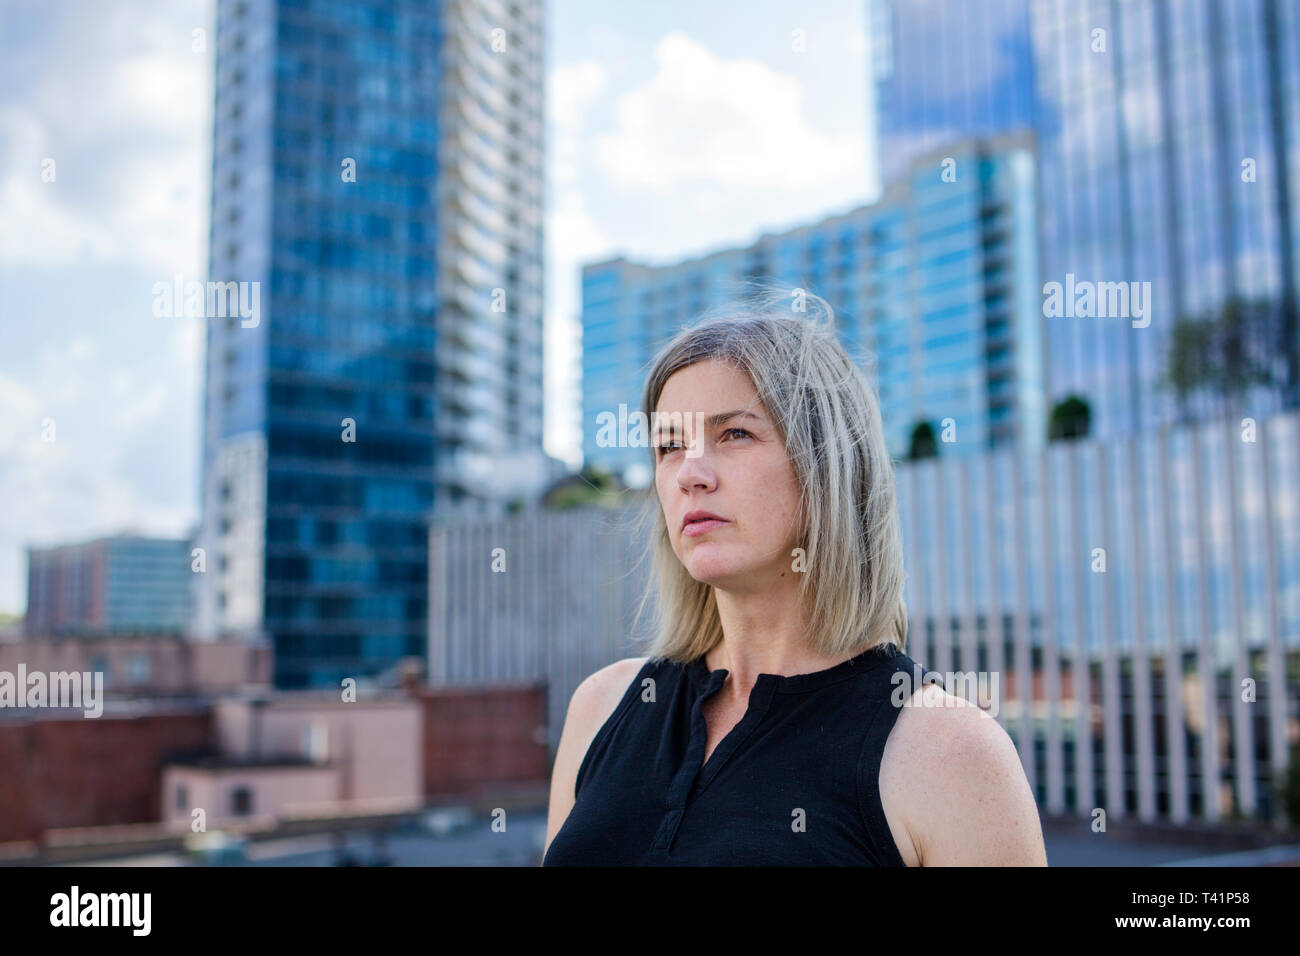 a beautiful woman stands in front of skyscrapers looking into distance Stock Photo